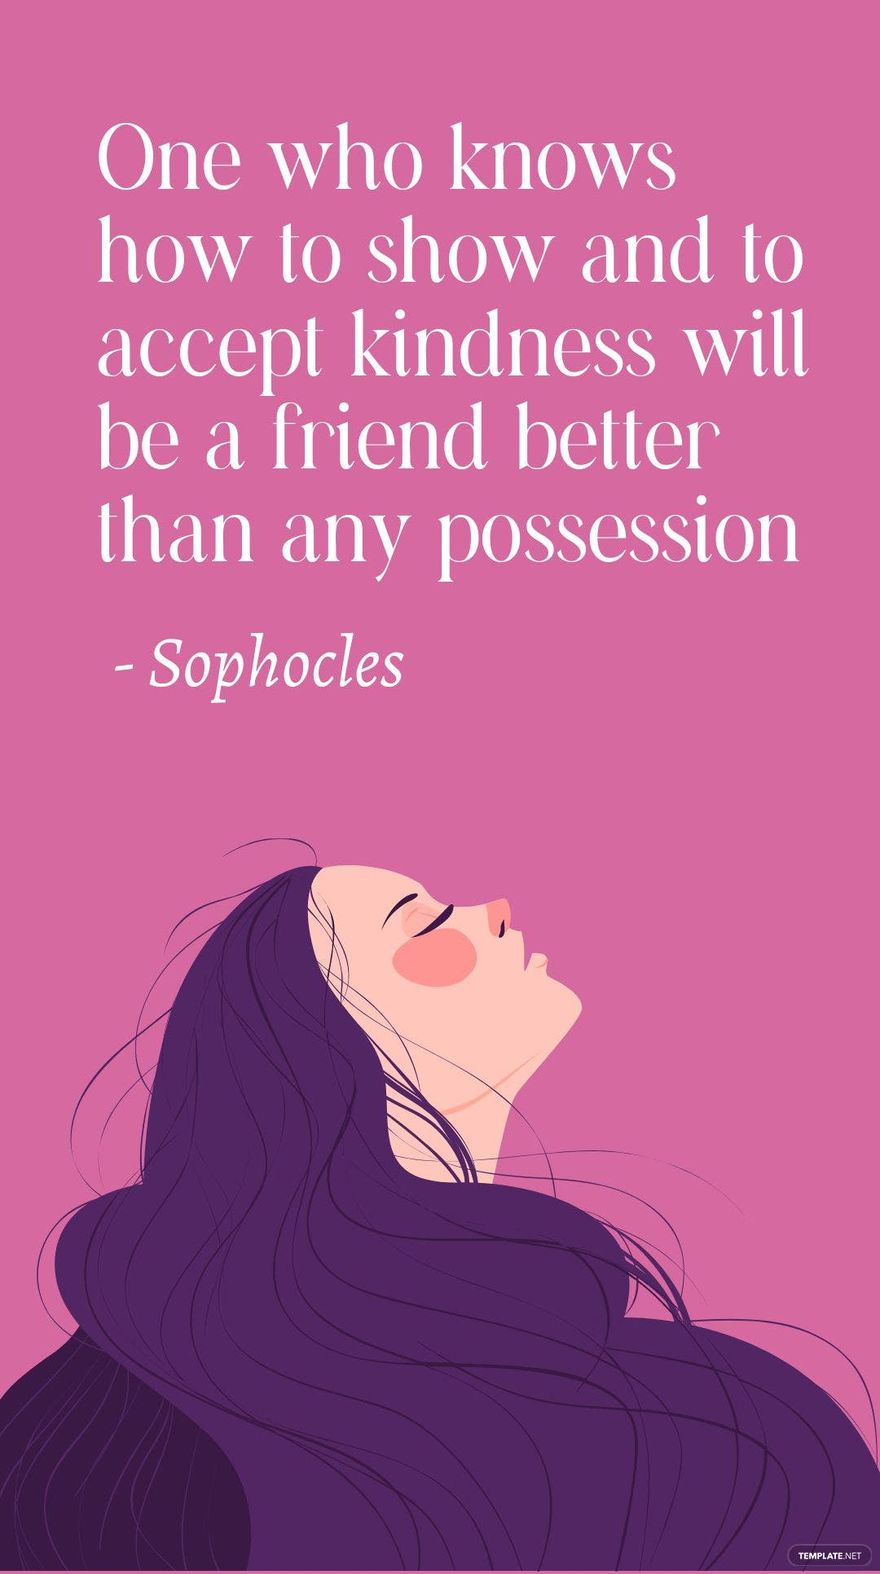 Sophocles - One who knows how to show and to accept kindness will be a friend better than any possession